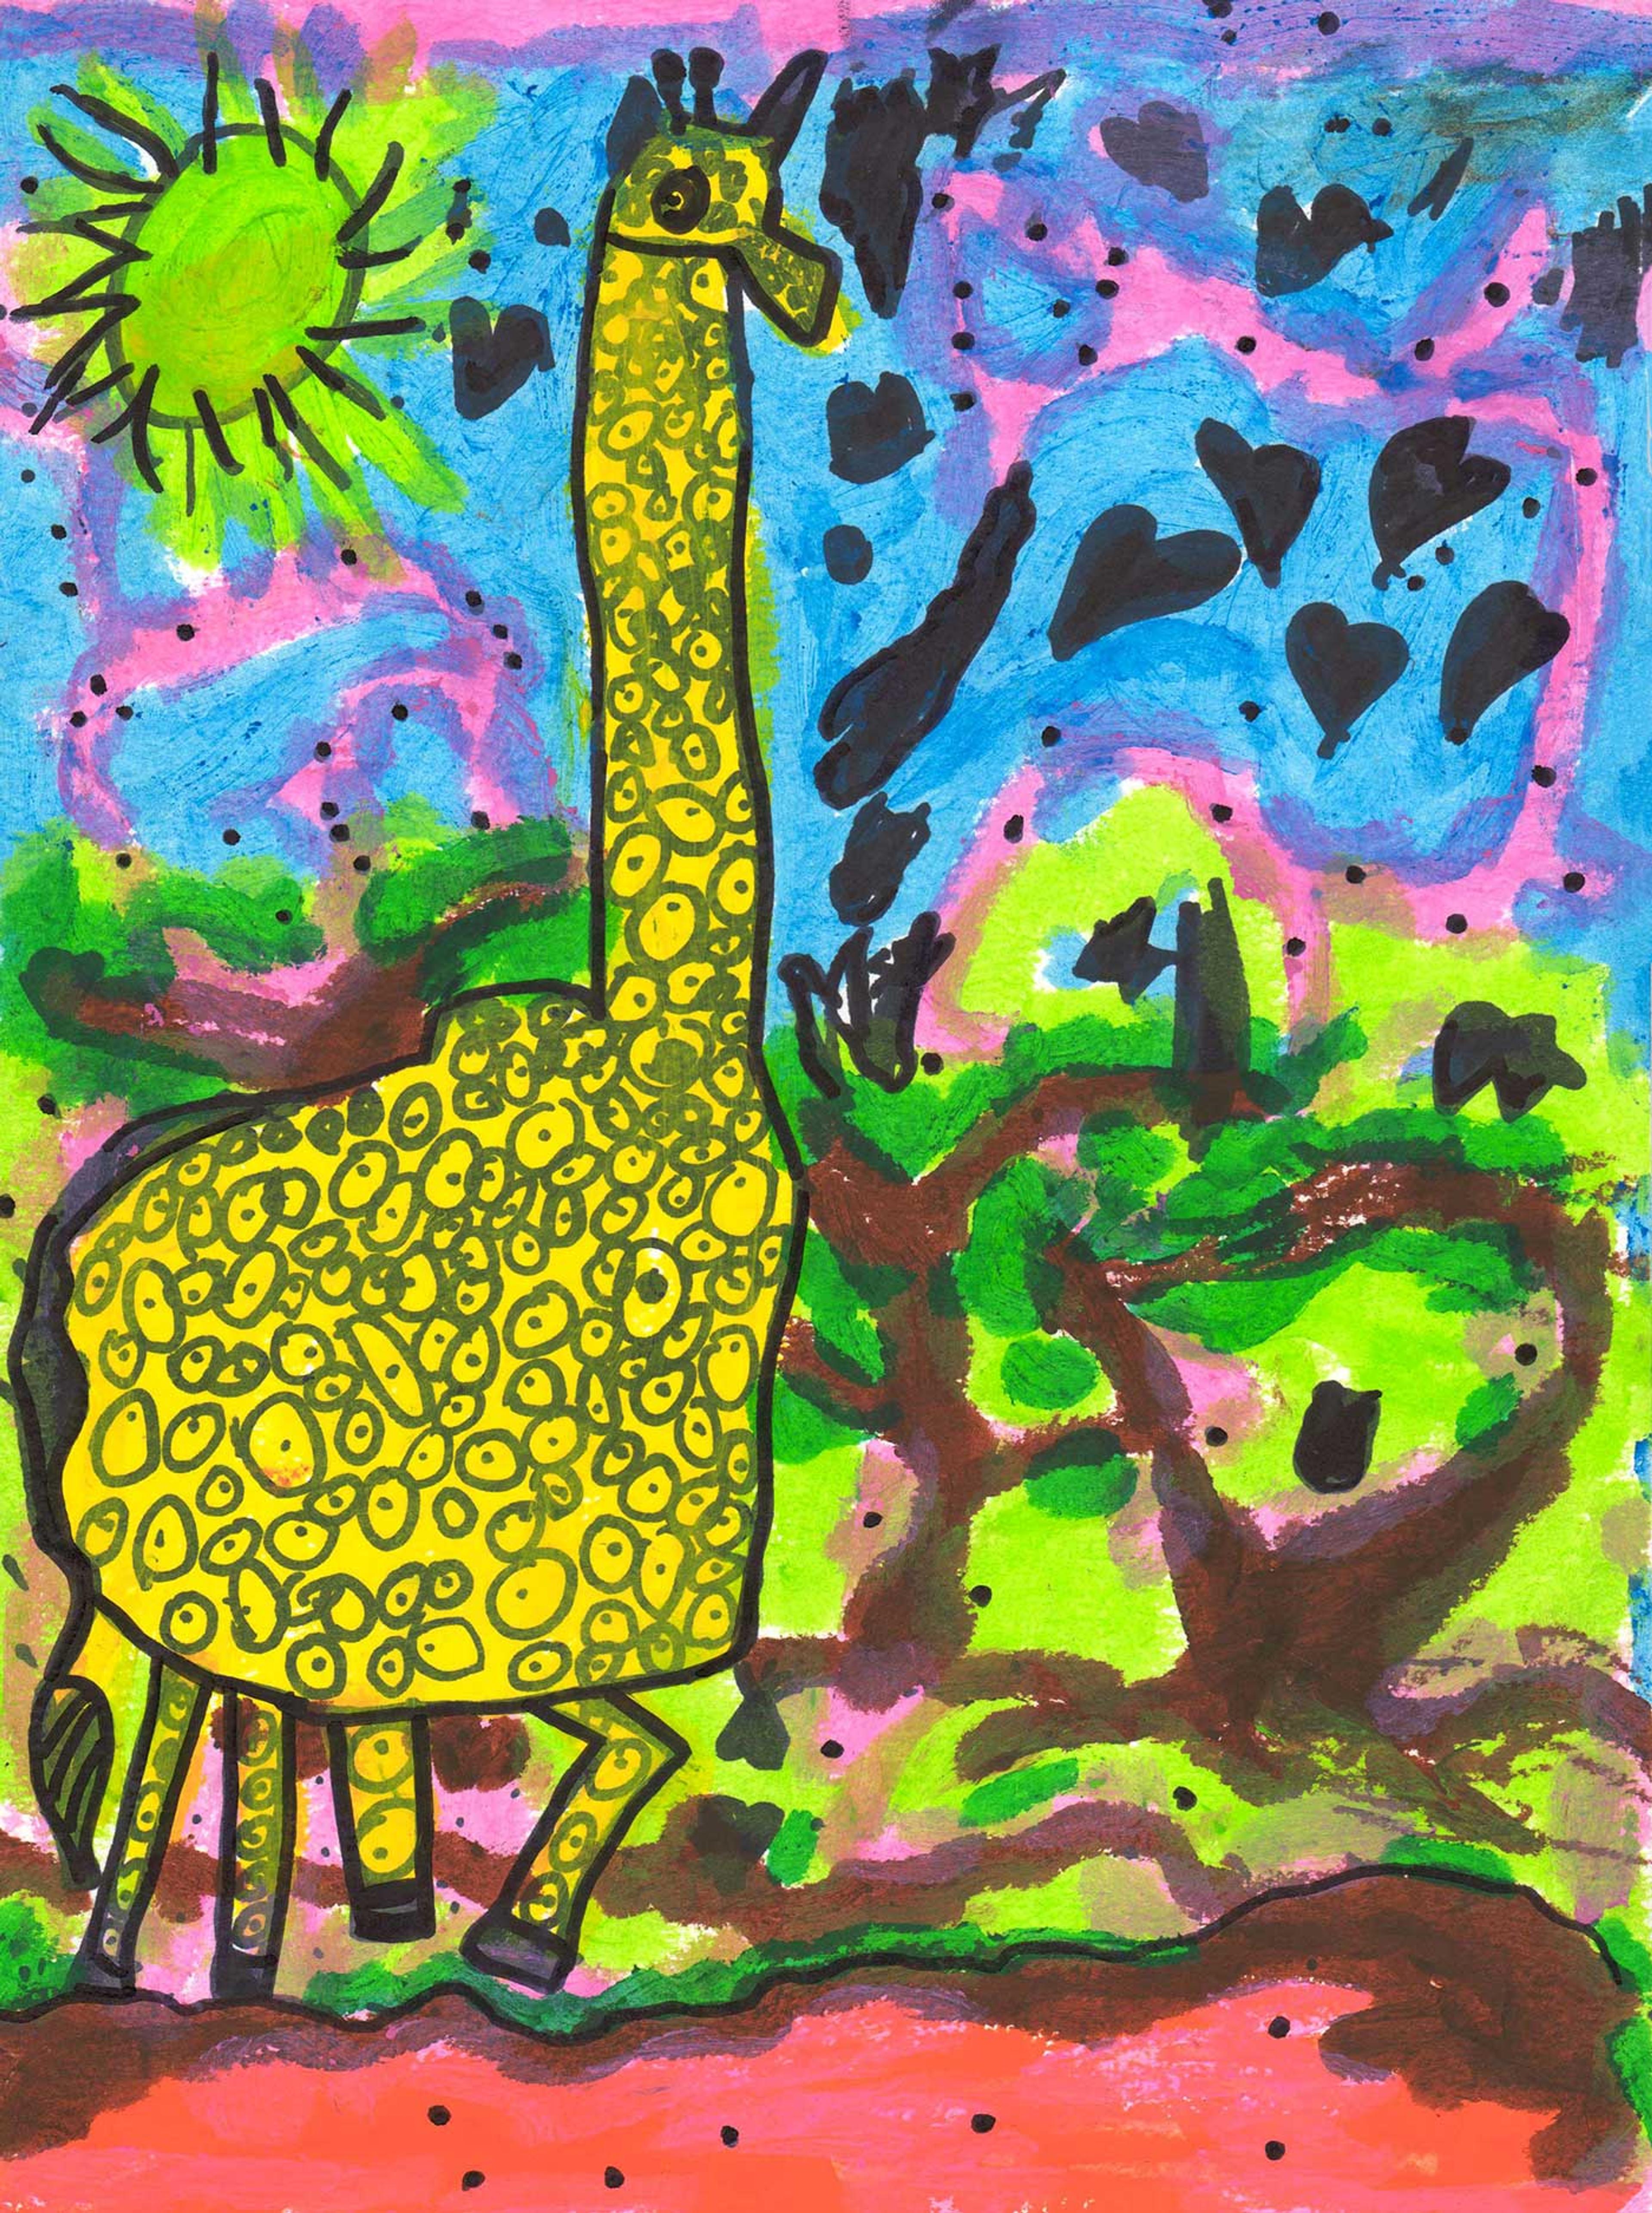 Drawing of a giraffe in a colorful landscape.